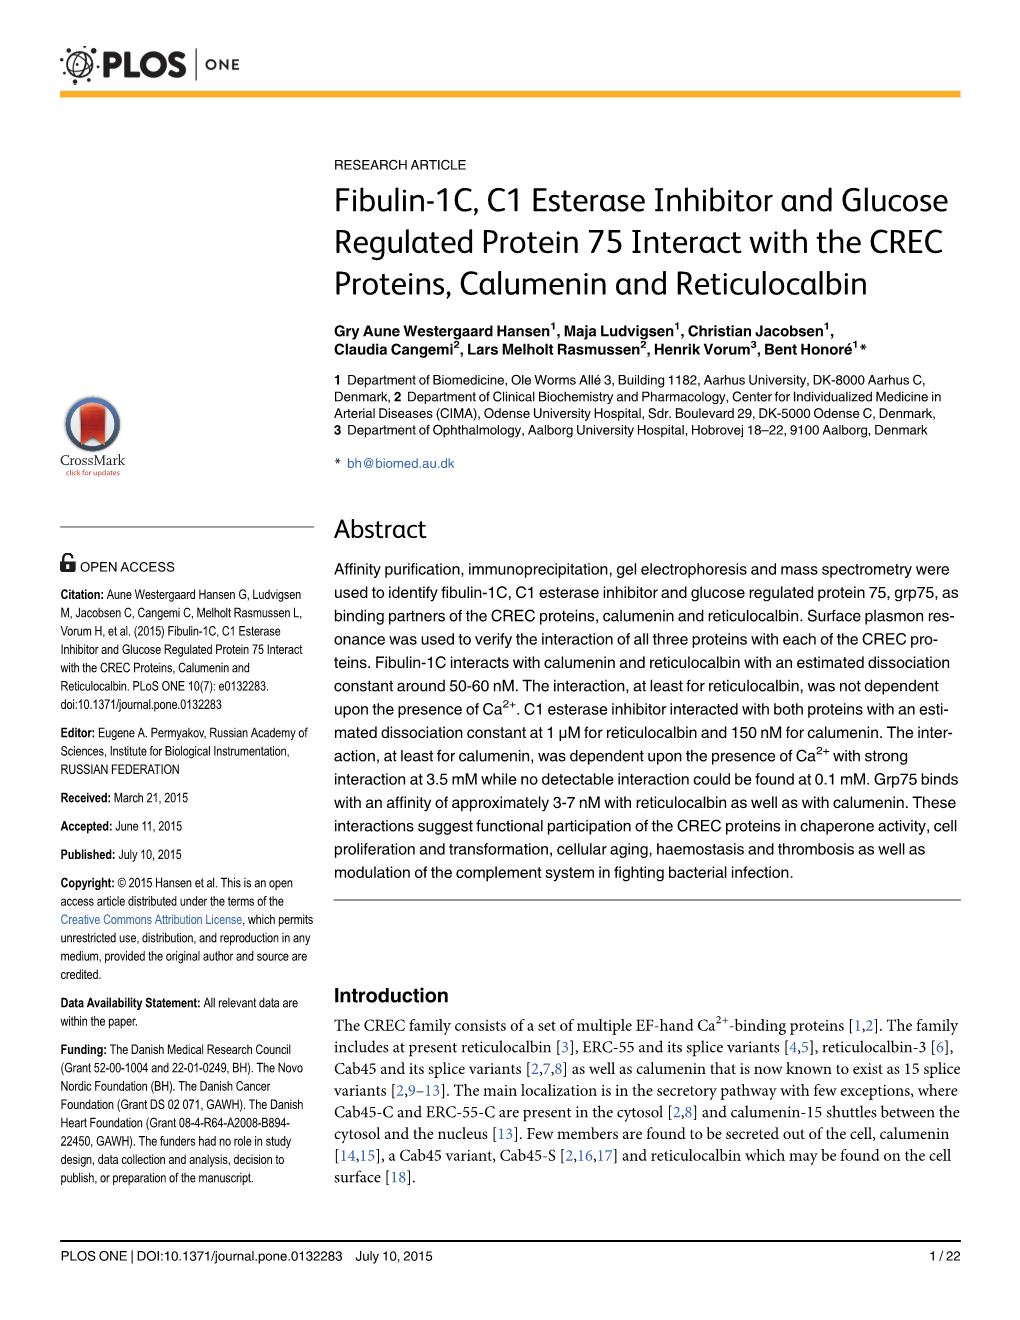 Fibulin-1C, C1 Esterase Inhibitor and Glucose Regulated Protein 75 Interact with the CREC Proteins, Calumenin and Reticulocalbin